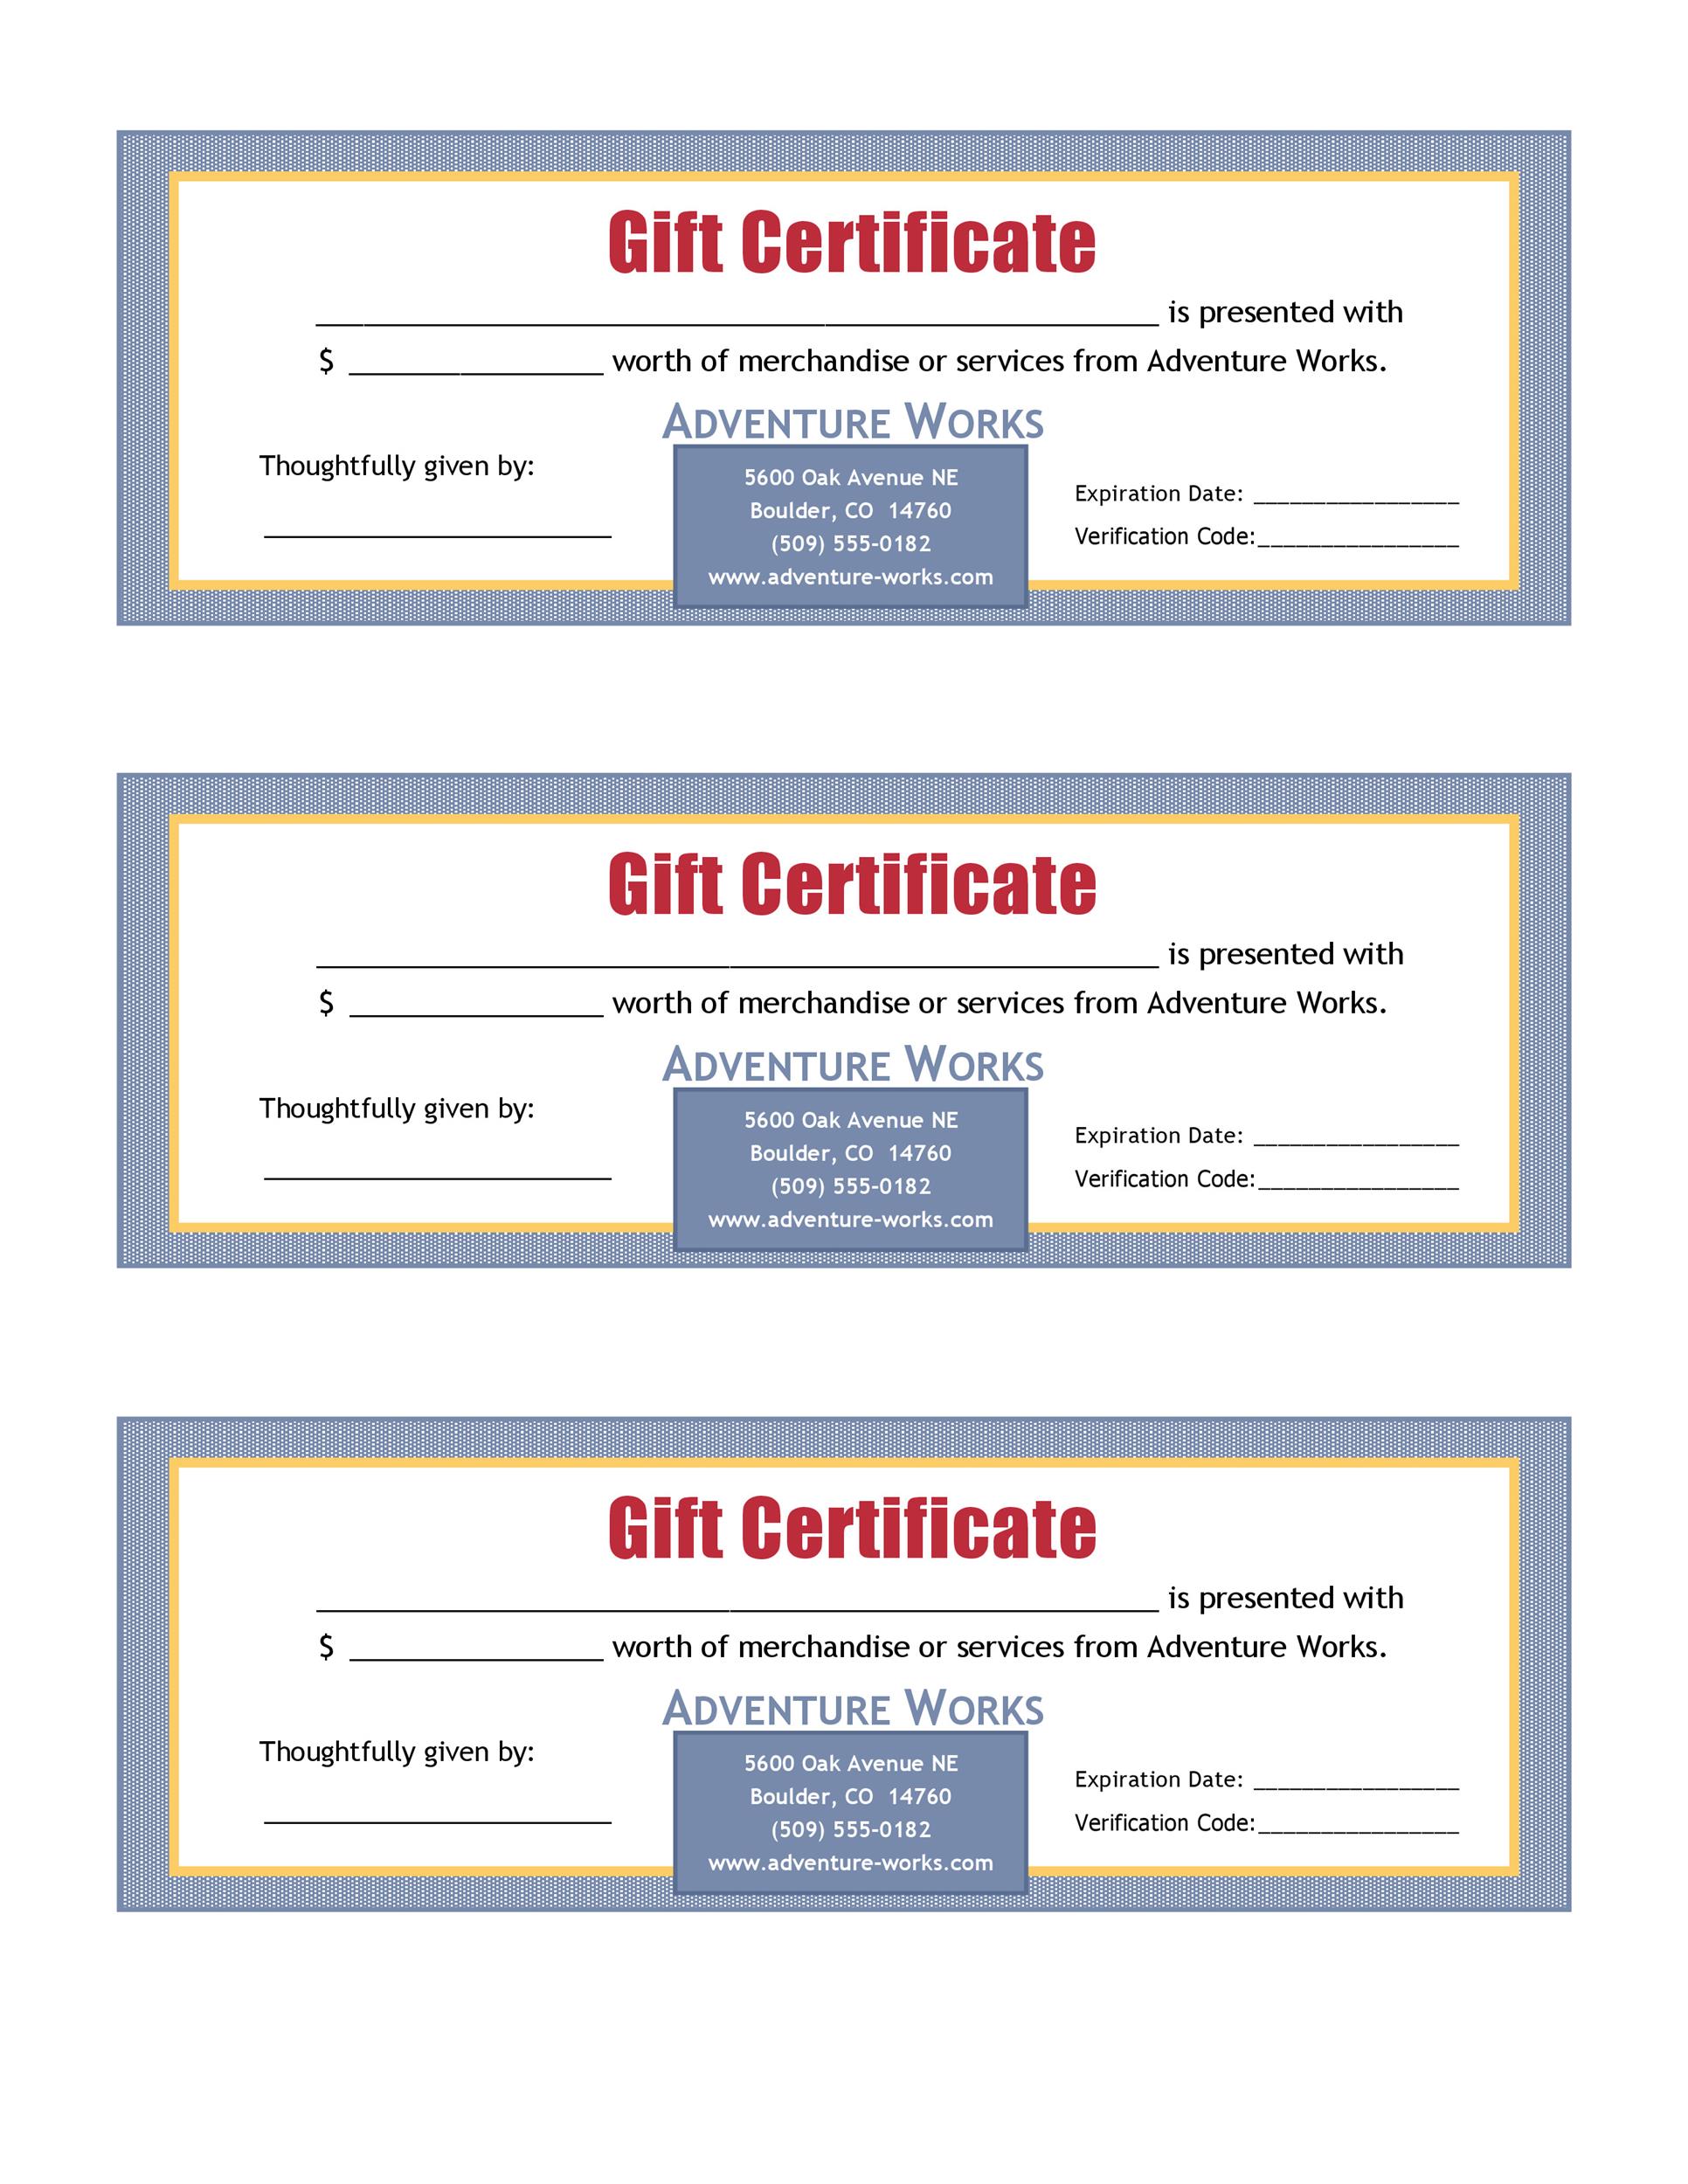 31 Free Gift Certificate Templates TemplateLab